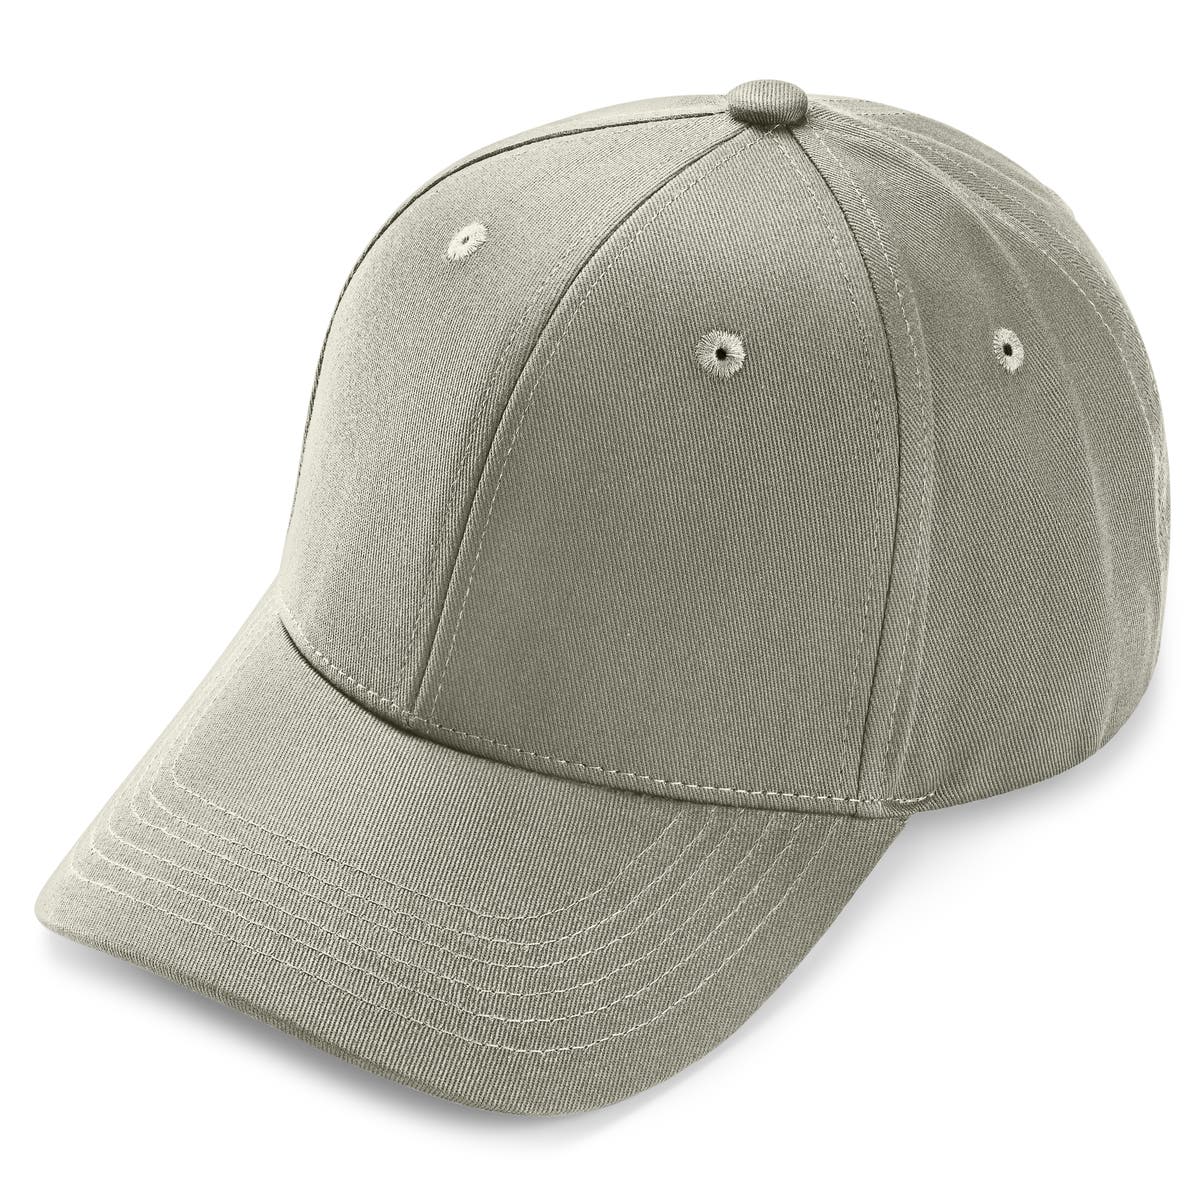 Captivating Breathable Hats for Men